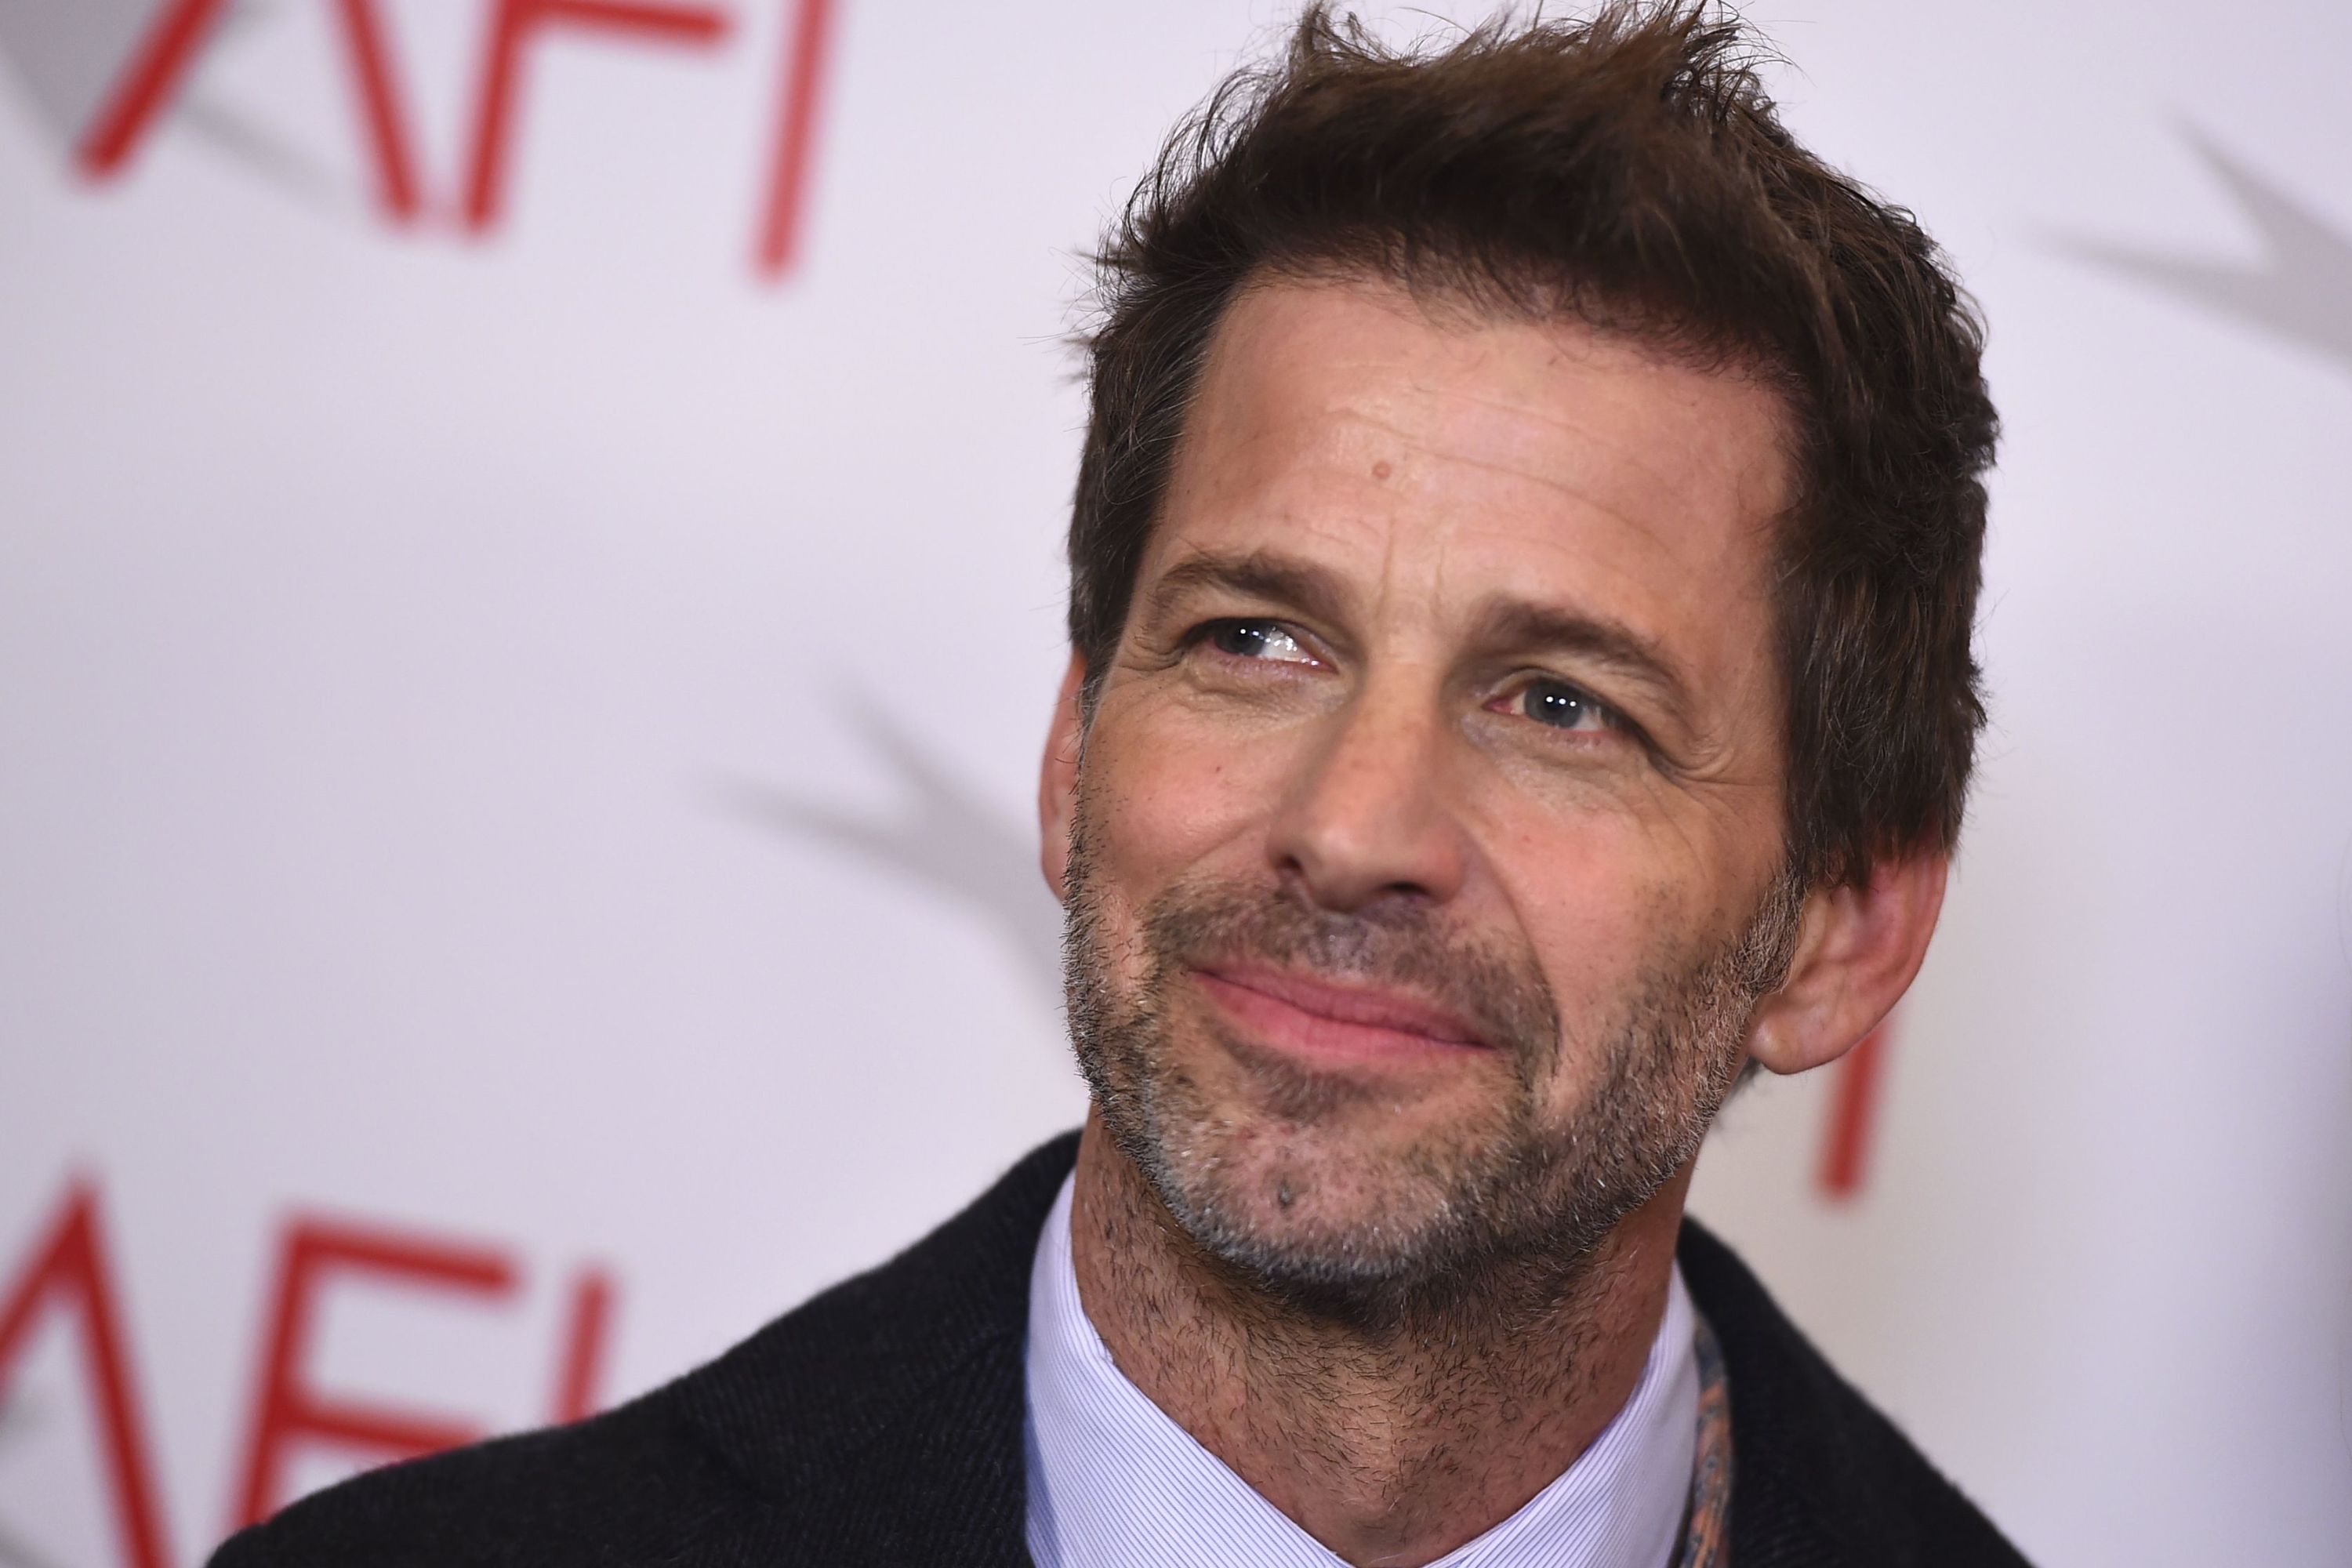 Zack Snyder arrives at the 2018 AFI Awards at the Four Seasons in Los Angeles2018 AFI Awards, Los Angeles, USA - 05 January 2018